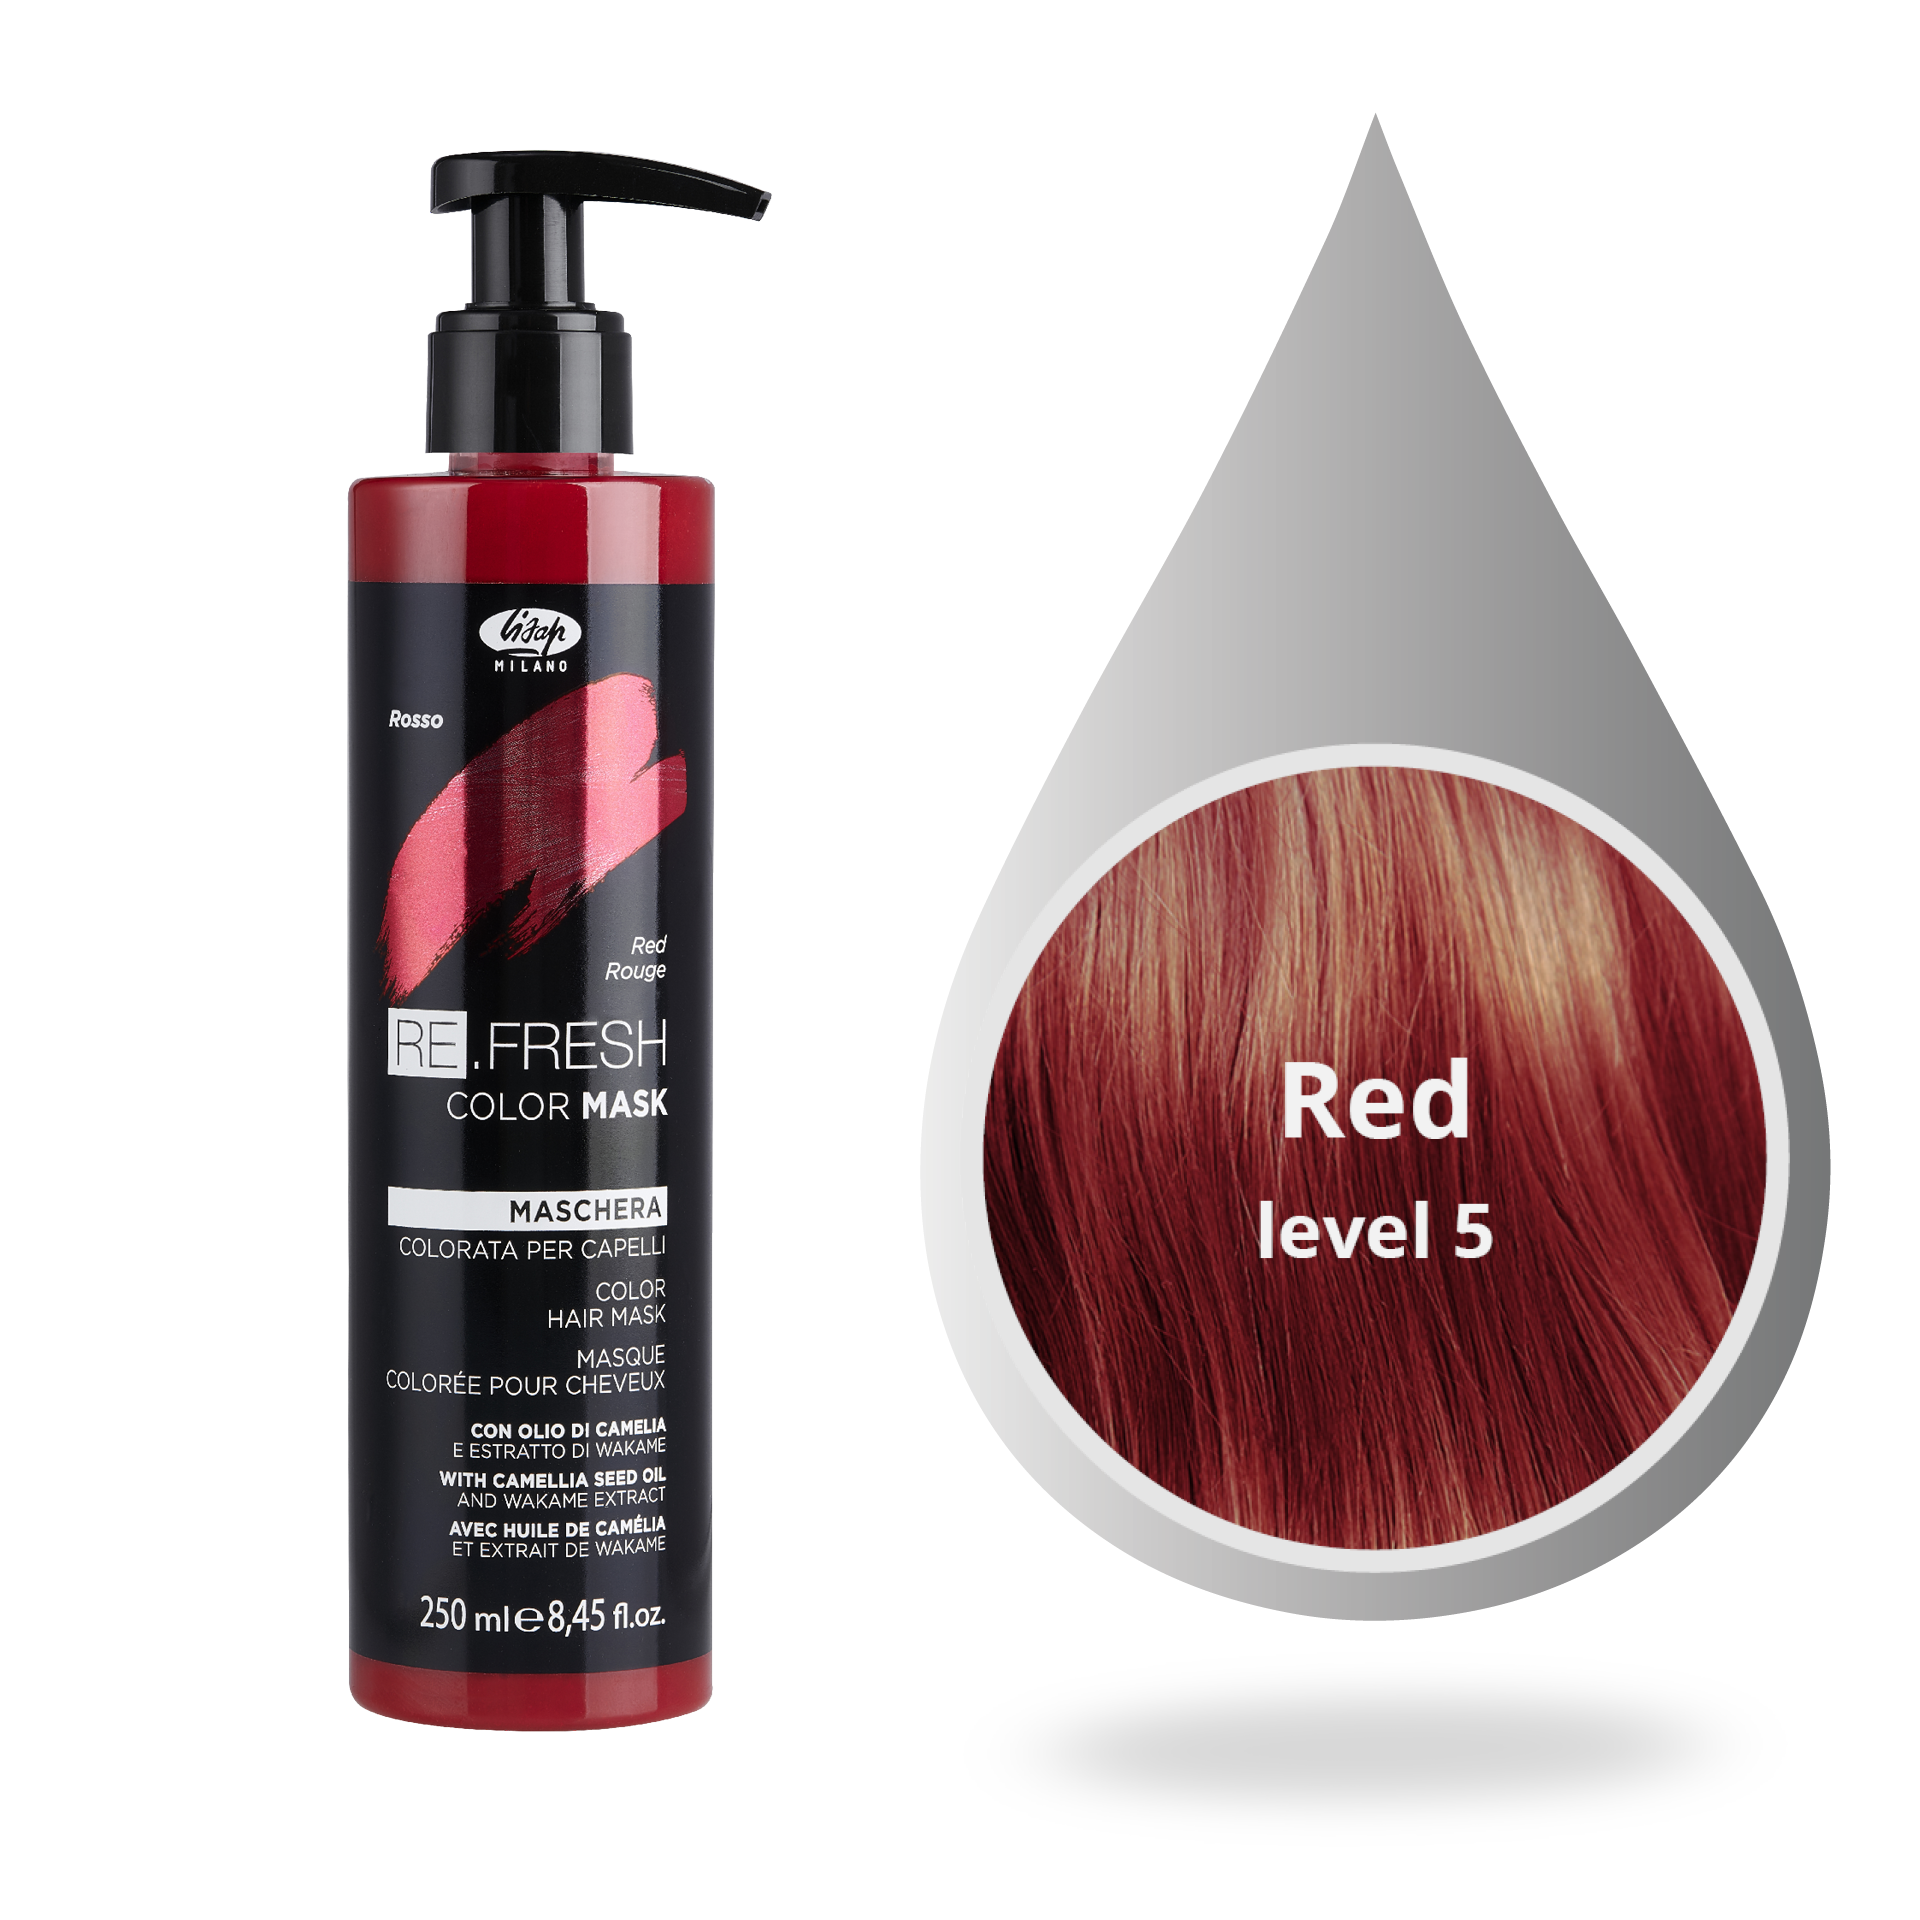 Lisap - Refresh Color Mask Red